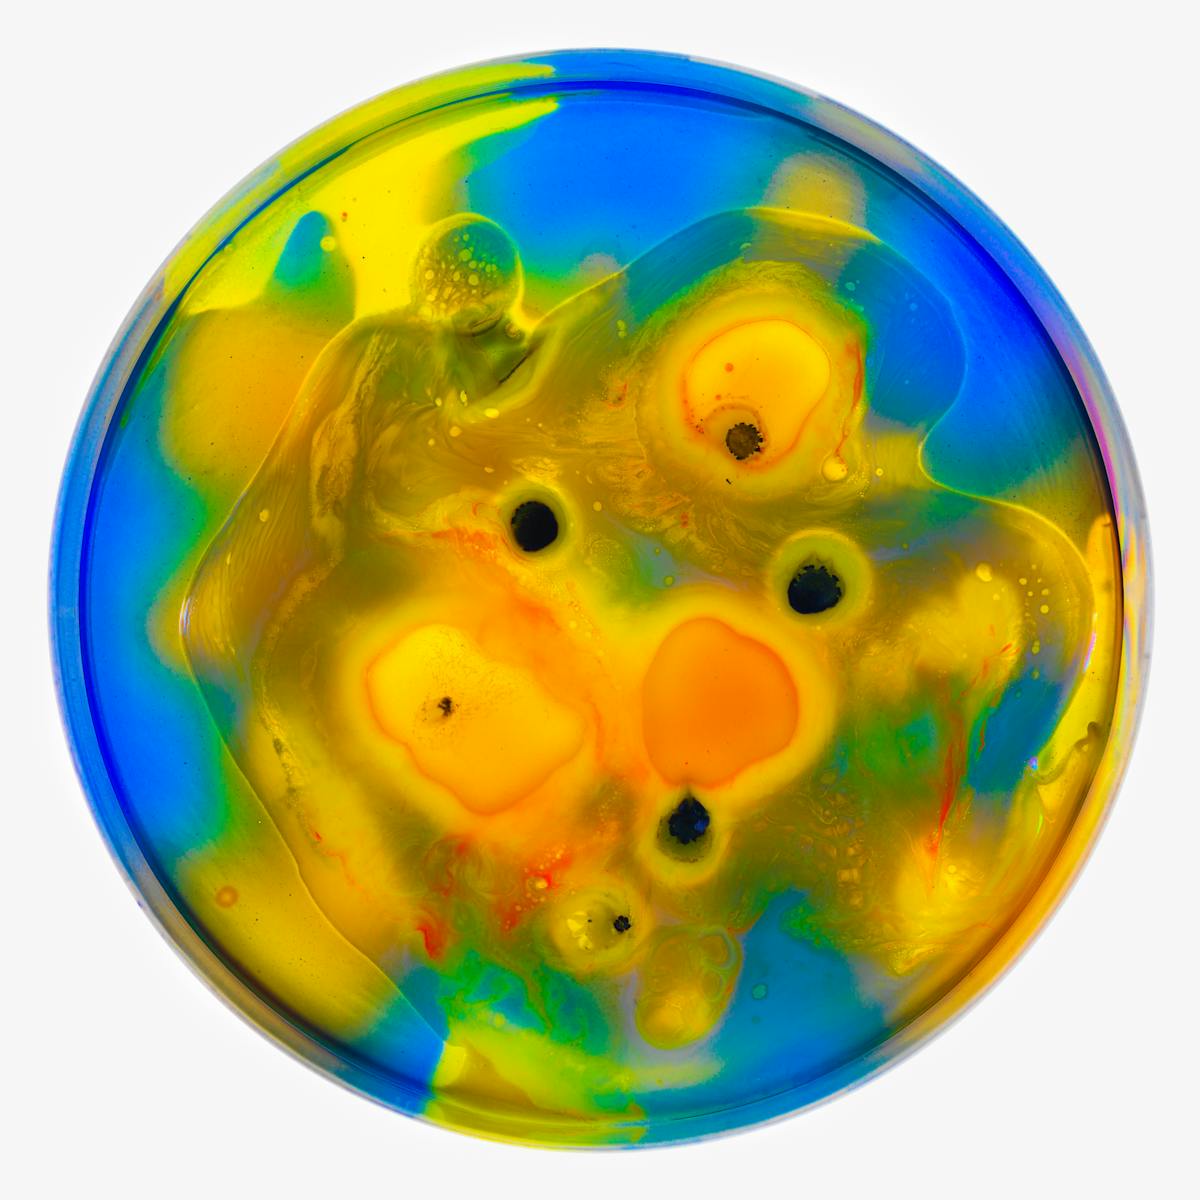 Photograph of a petri dish containing colourful swirls of blue, yellow, orange and black spots, made from ink, watercolour, pva and resin.